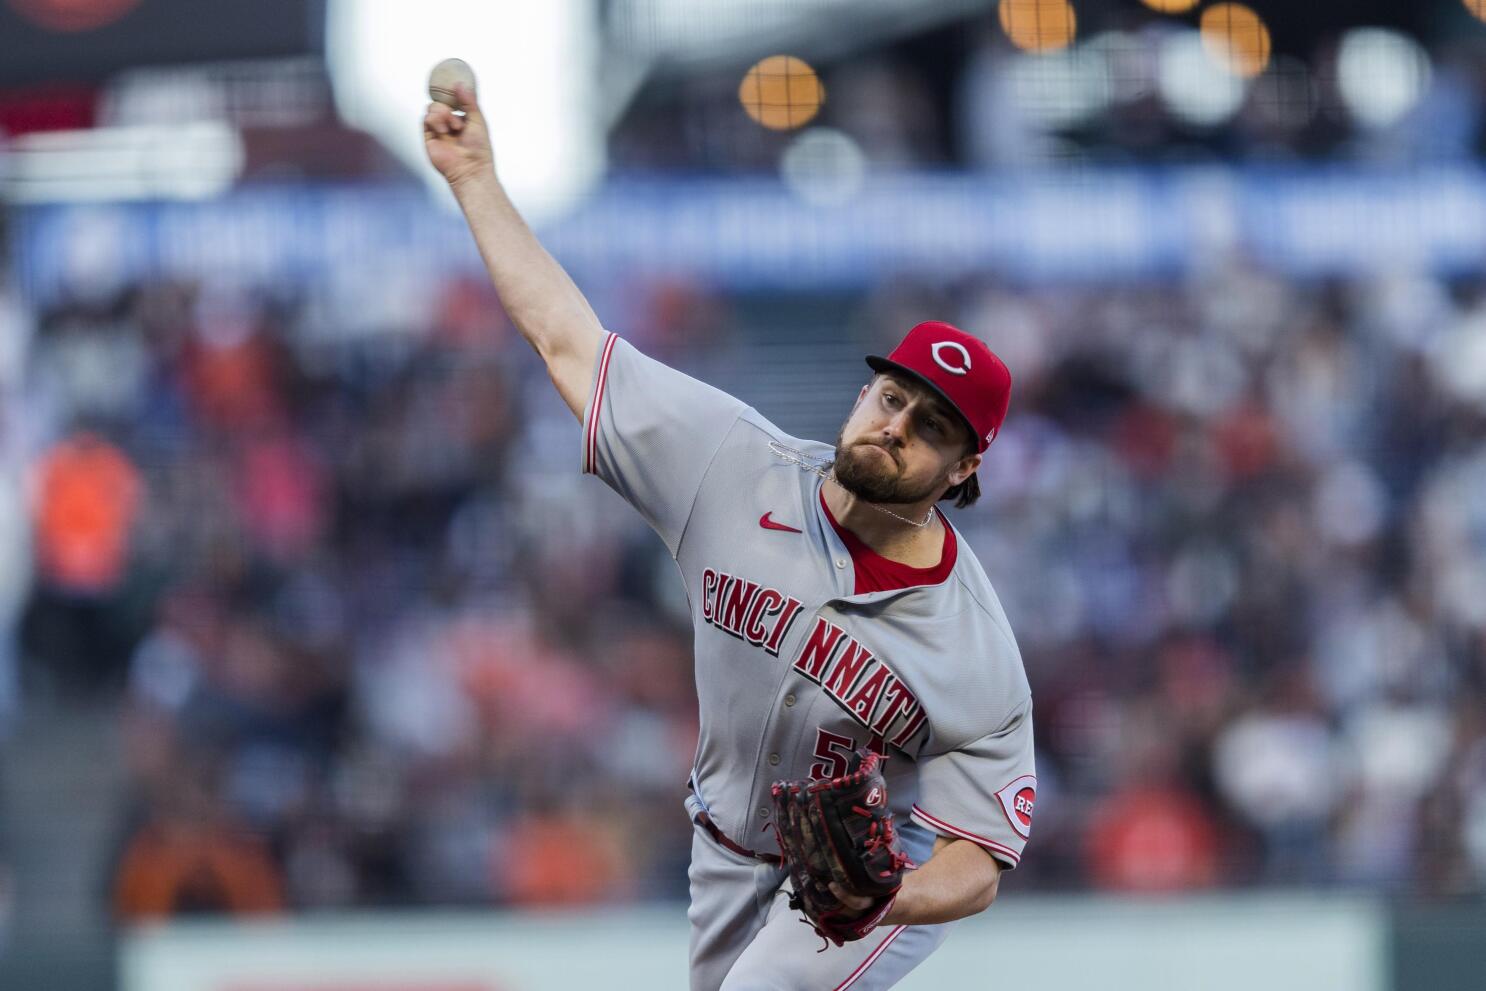 Graham Ashcraft of the Cincinnati Reds pitches during a game against  News Photo - Getty Images